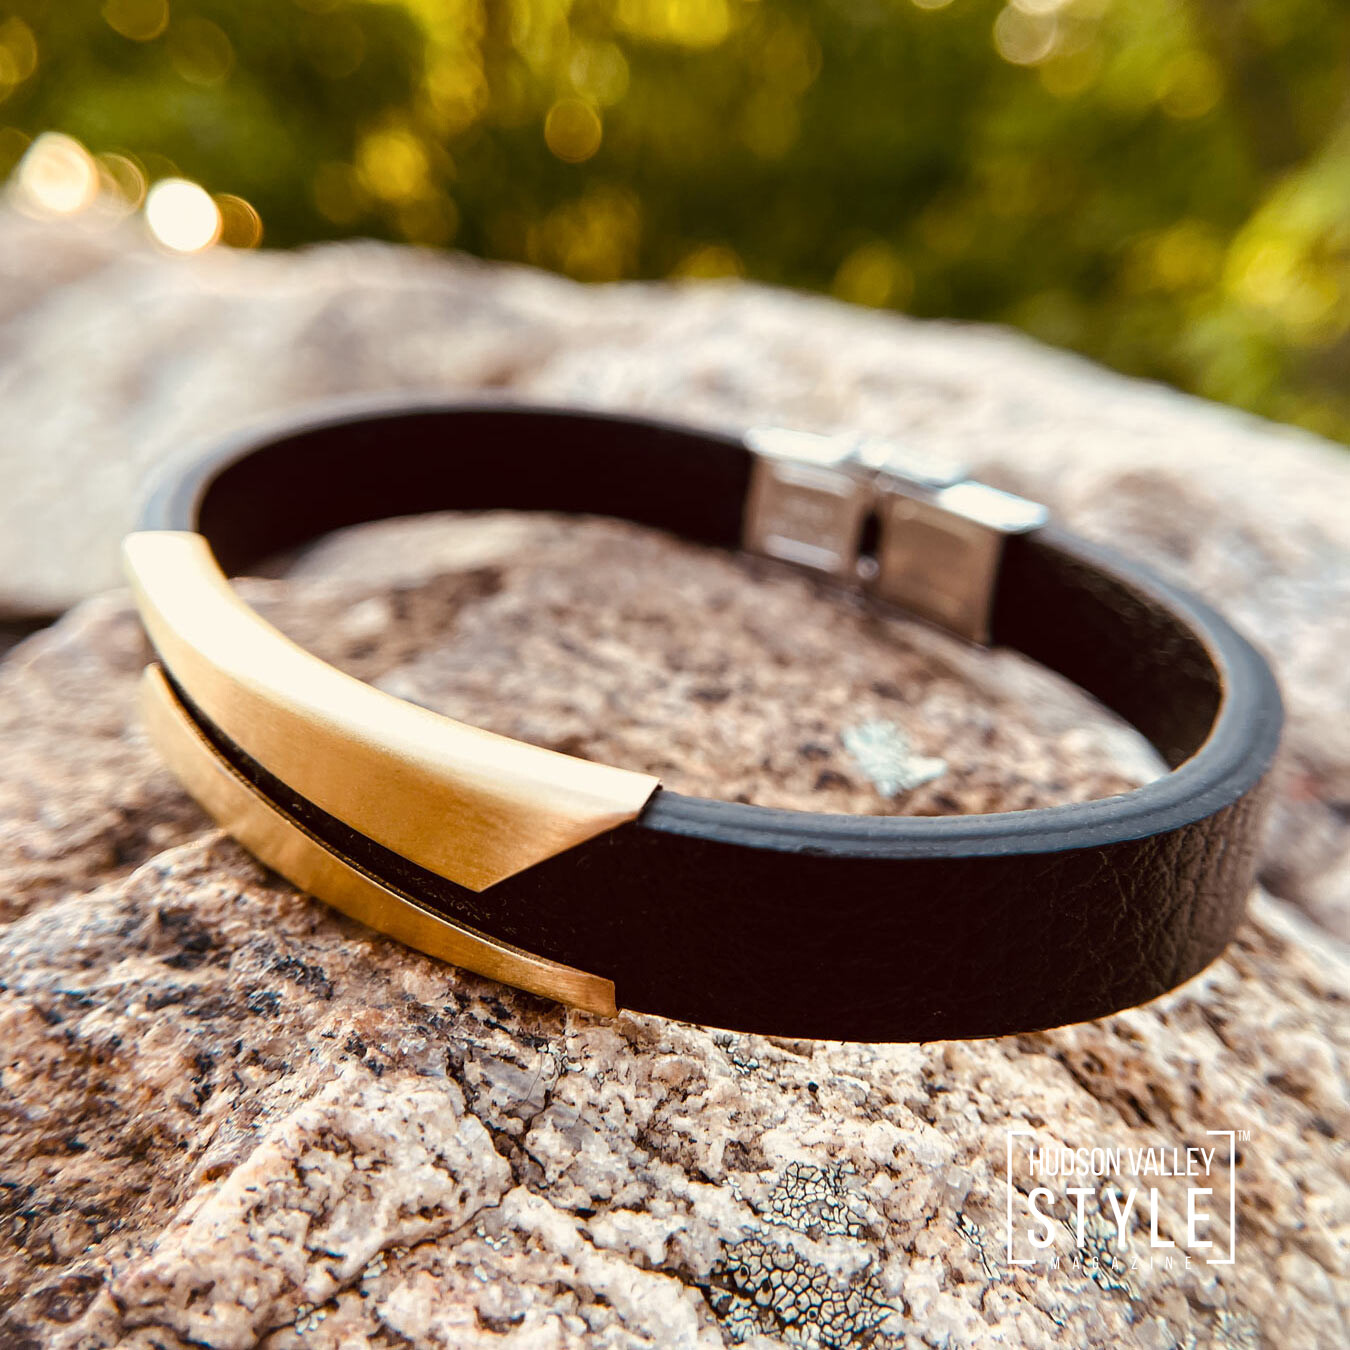 2021 Men's Fashion Trend: Bracelets to Elevate Style and Boost Confidence